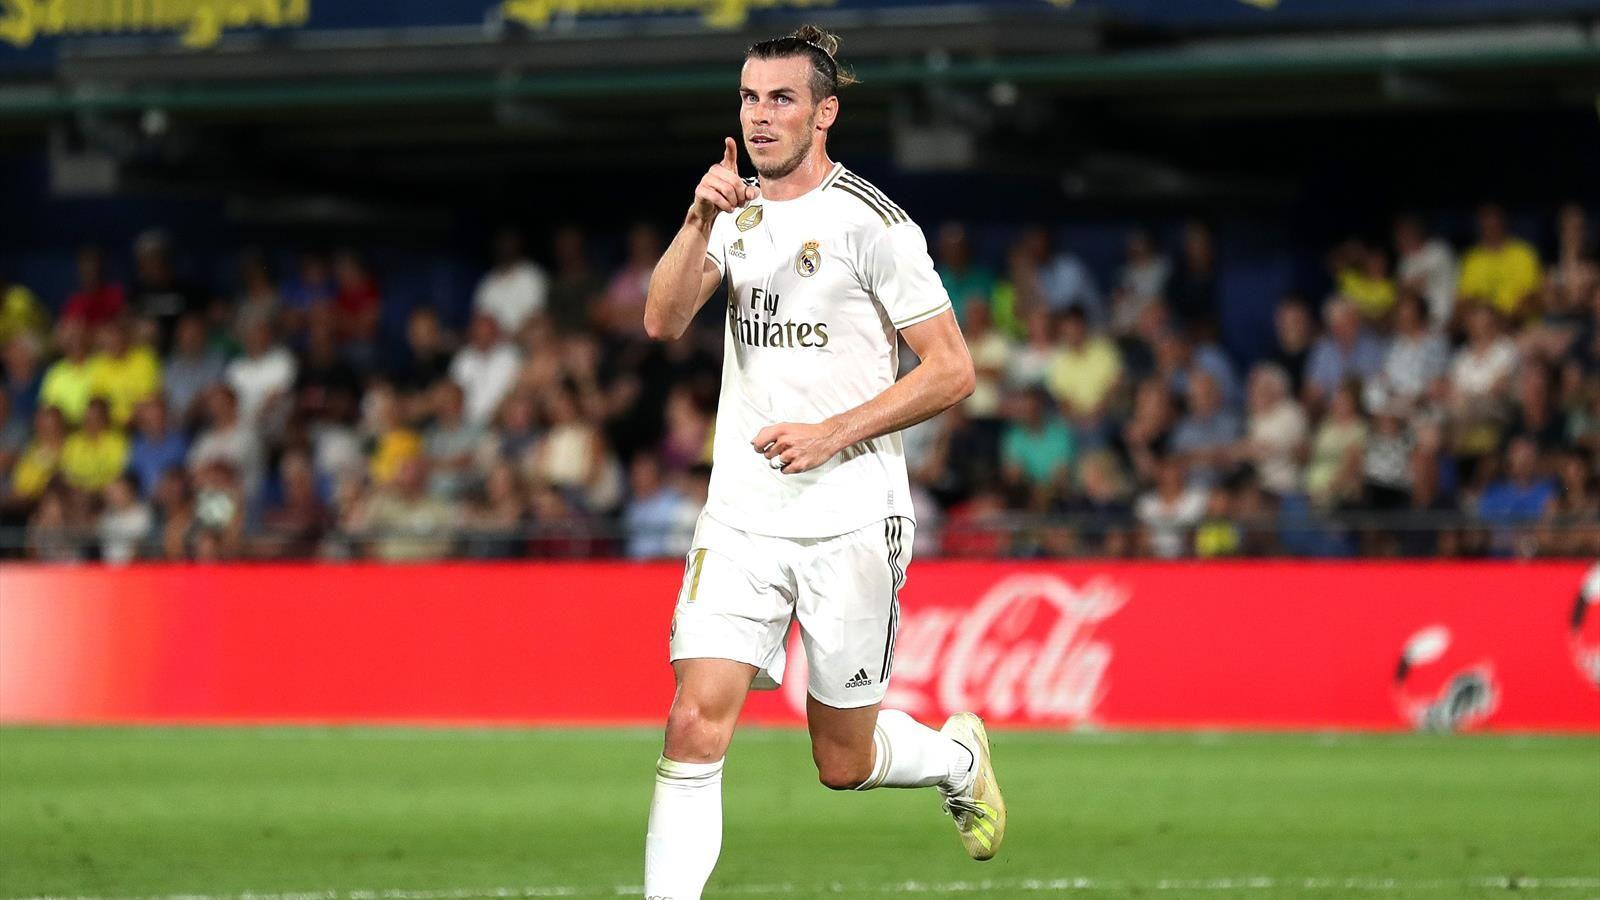 Football news Bale hits brace, sees red as Madrid salvage